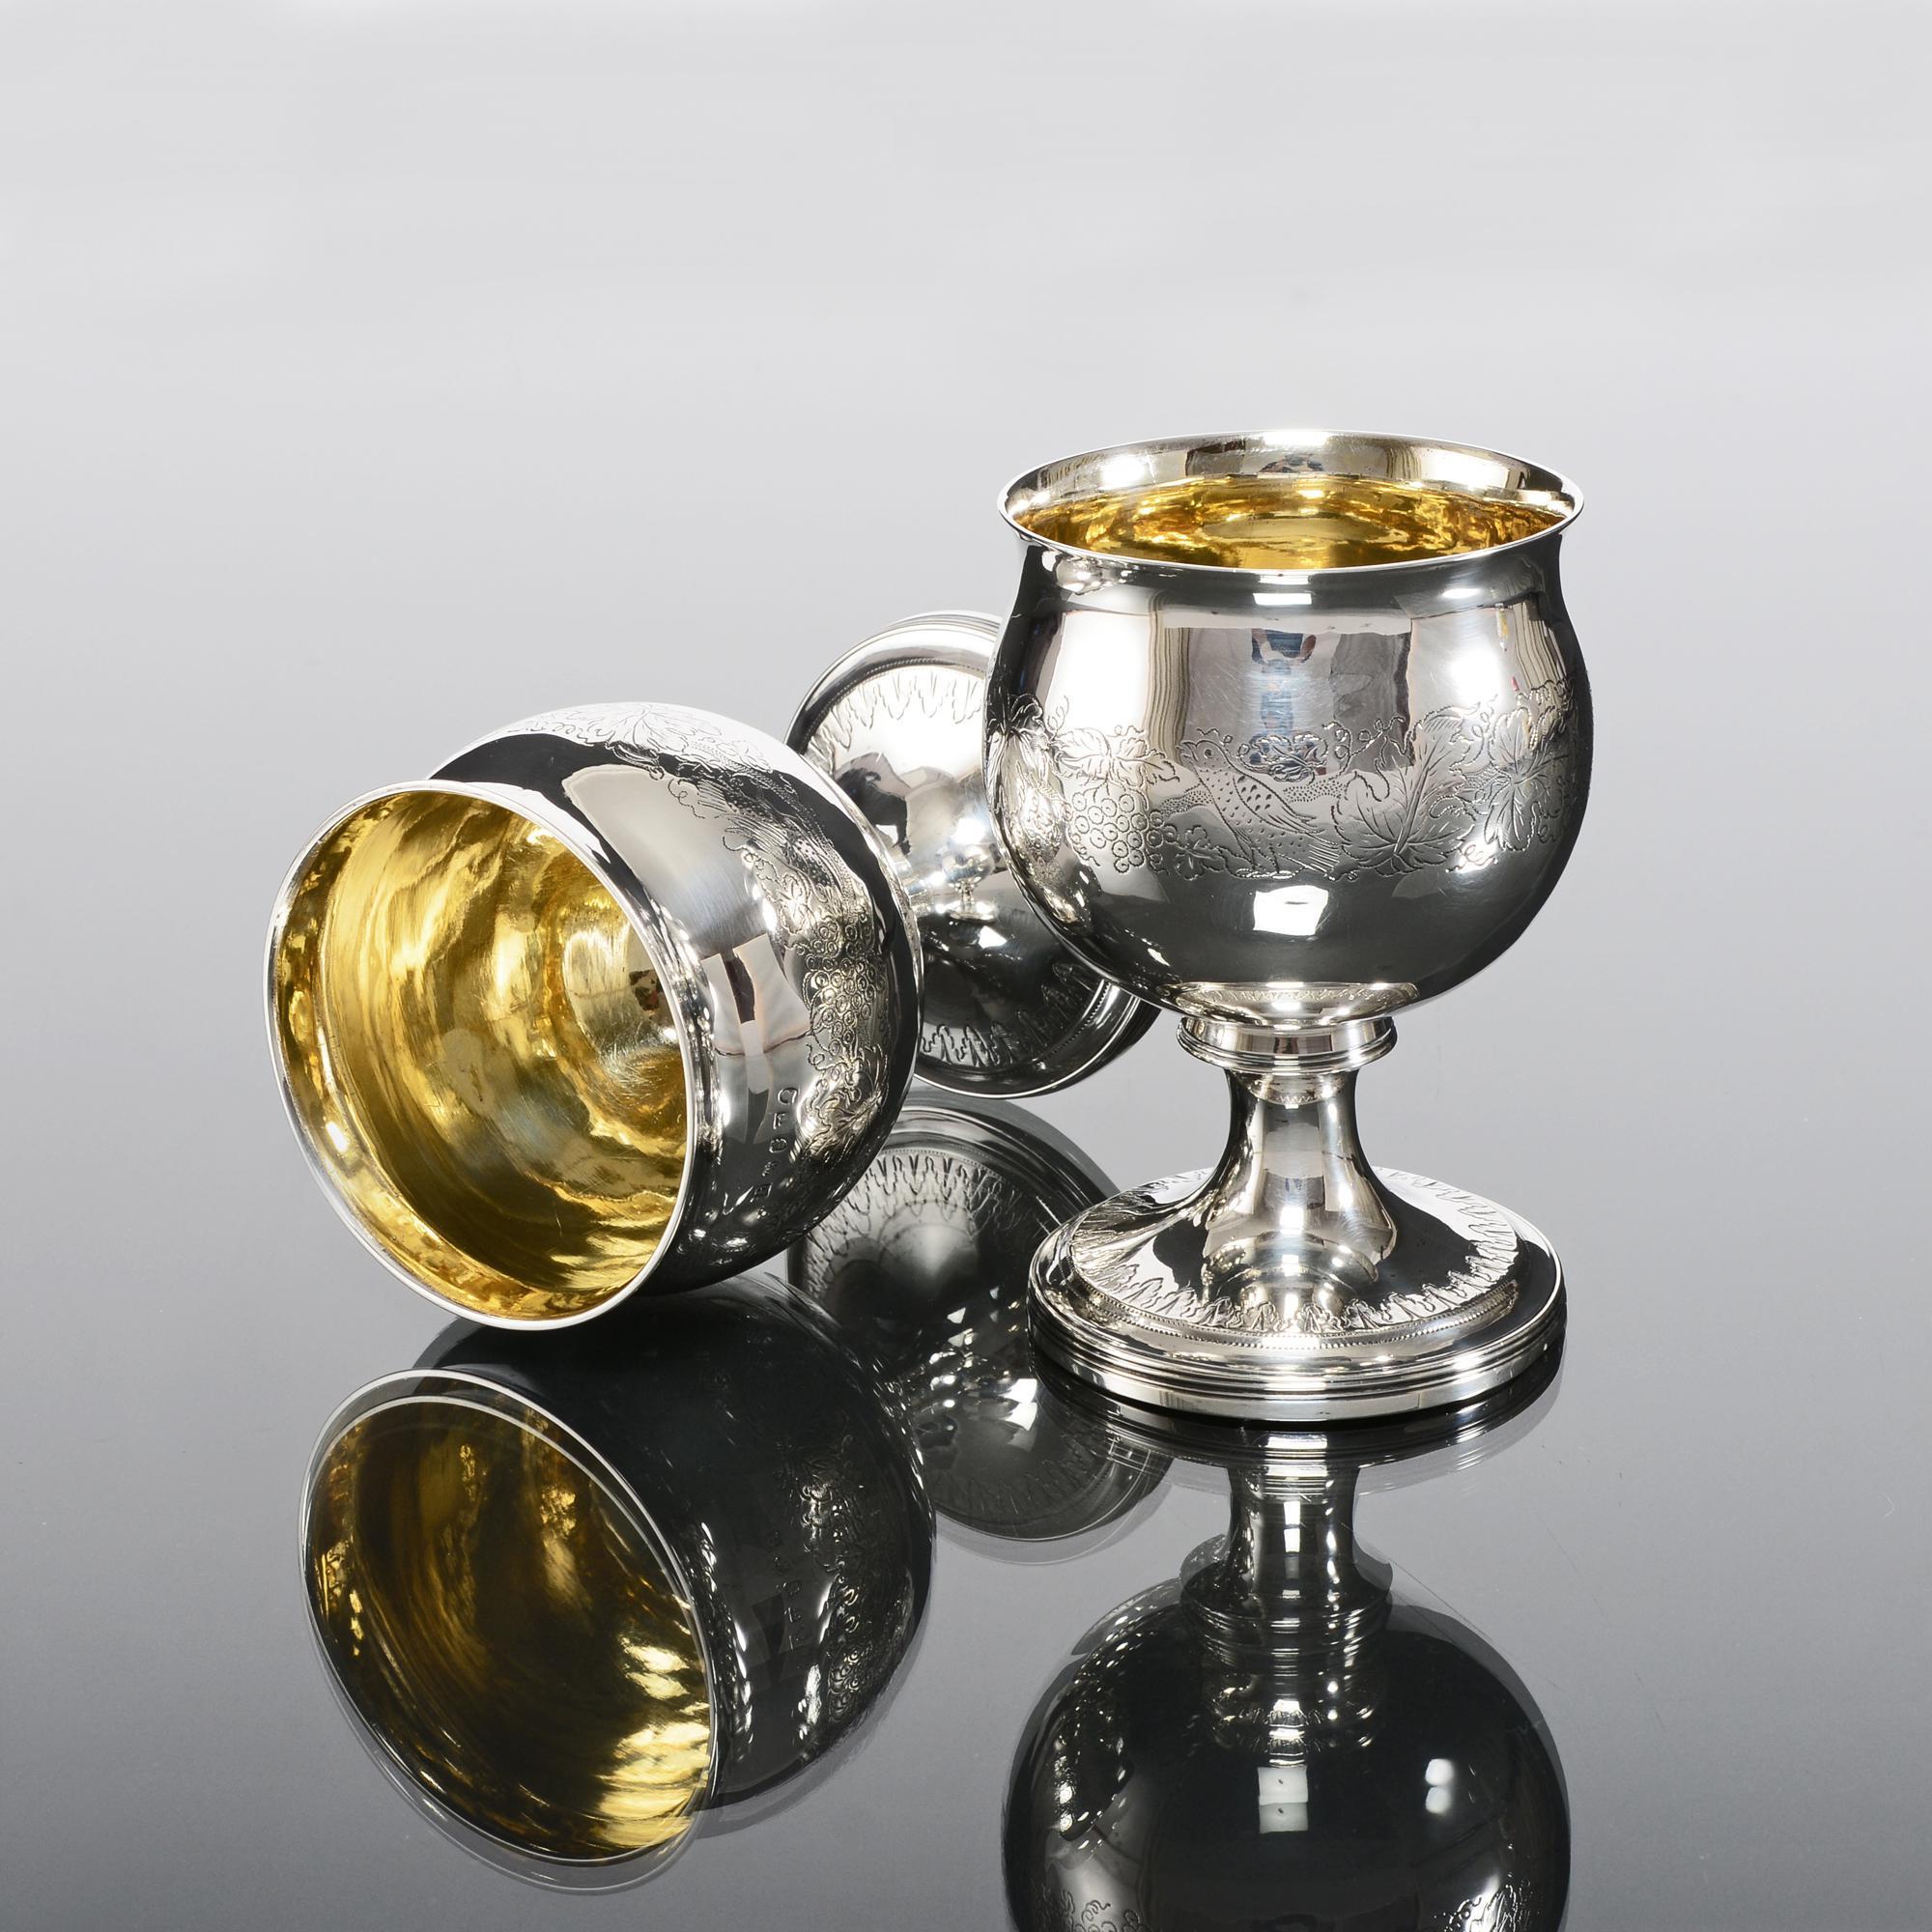 Pair of Georgian silver goblets, made in the reign of George III in 1814, with bulbous flared-lip bowls and round, tapering stems. The bodies are attractively engraved with stippled engraving which is typical of the period, depicting exotic birds